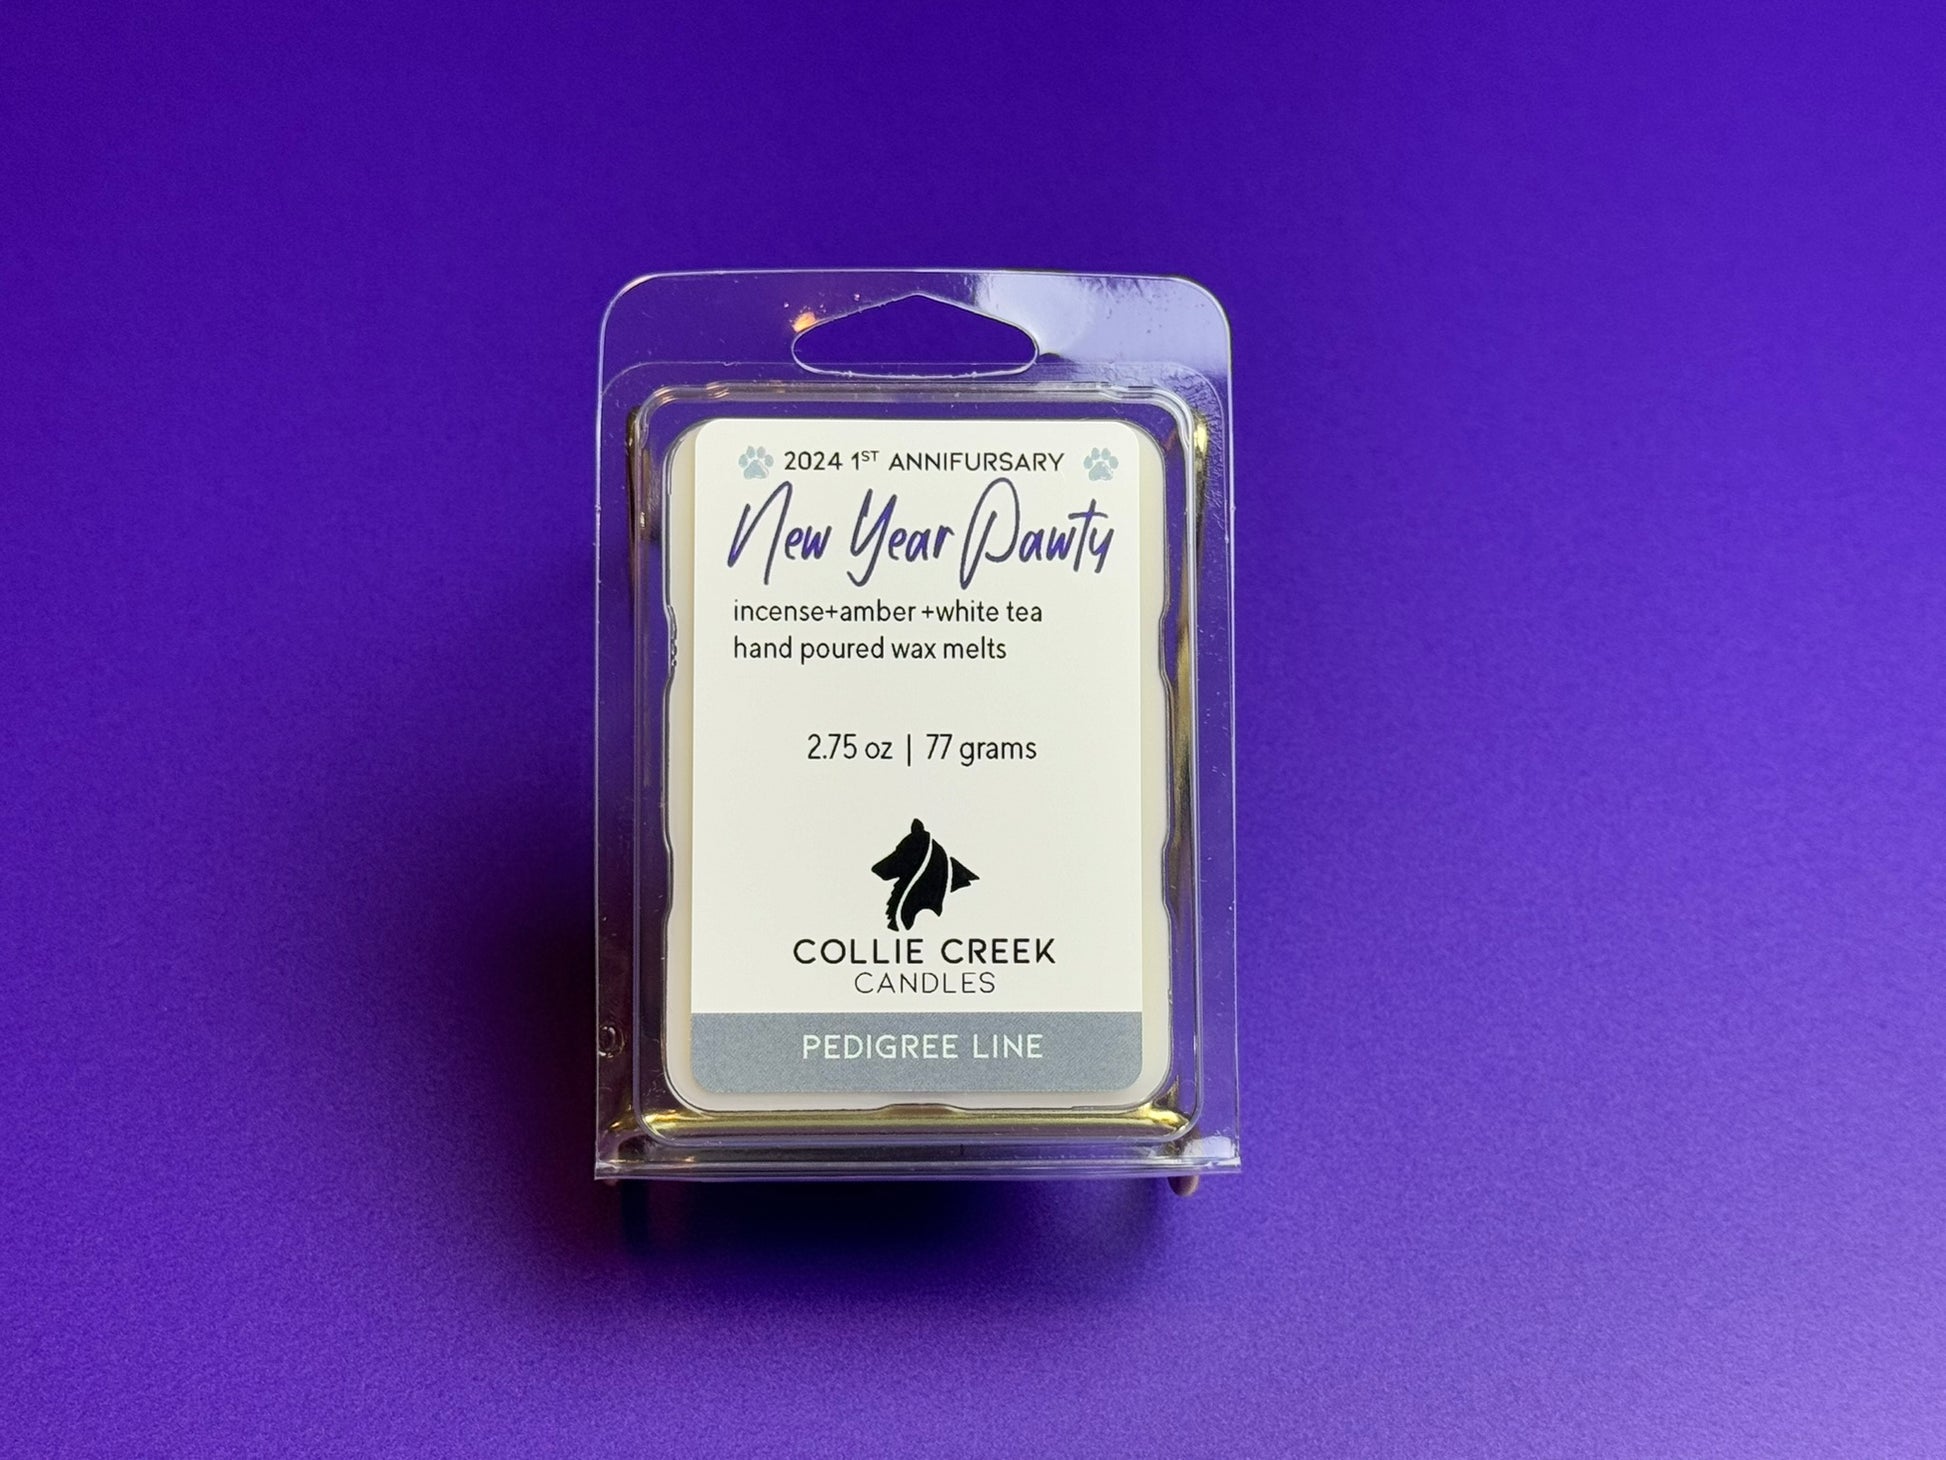 Wax melt called New Year Pawty from Collie Creek Candles on a field of purple